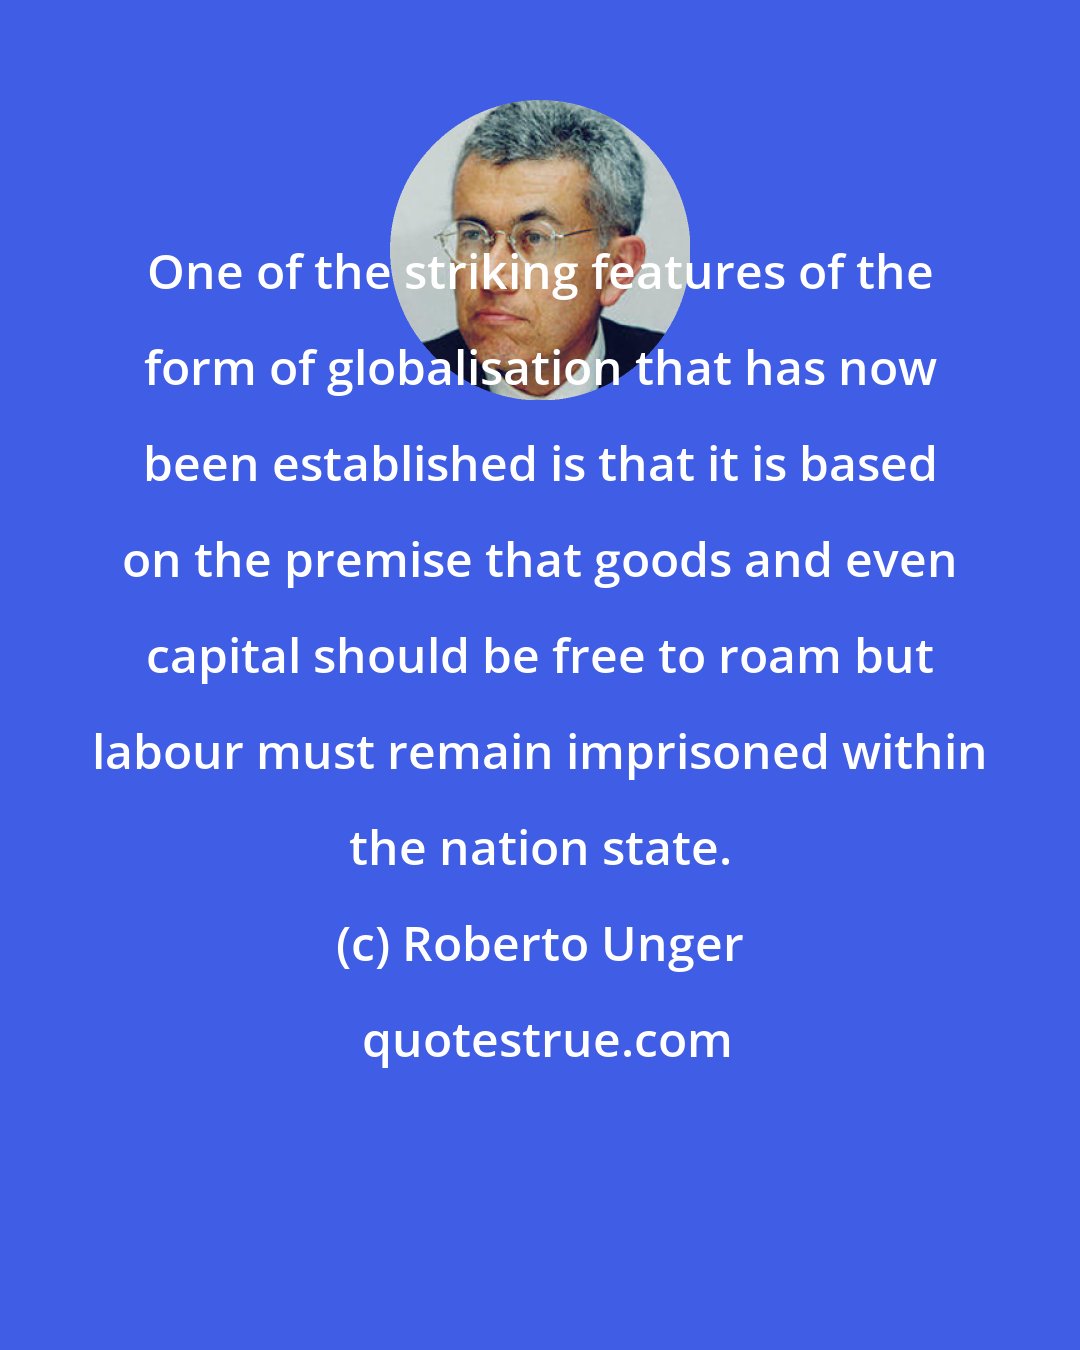 Roberto Unger: One of the striking features of the form of globalisation that has now been established is that it is based on the premise that goods and even capital should be free to roam but labour must remain imprisoned within the nation state.